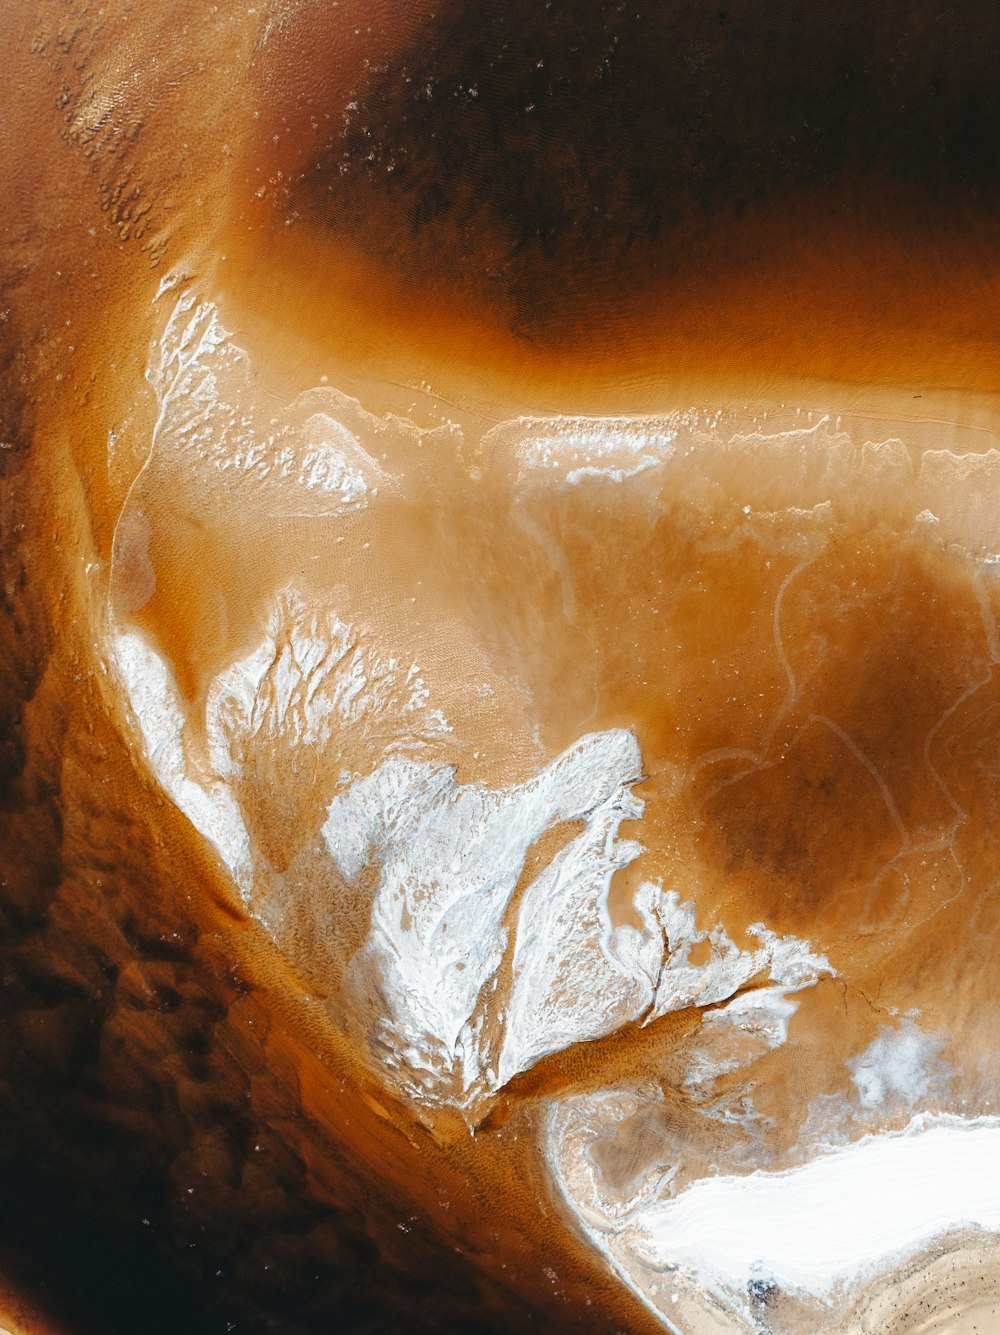 a close up of a brown substance in water